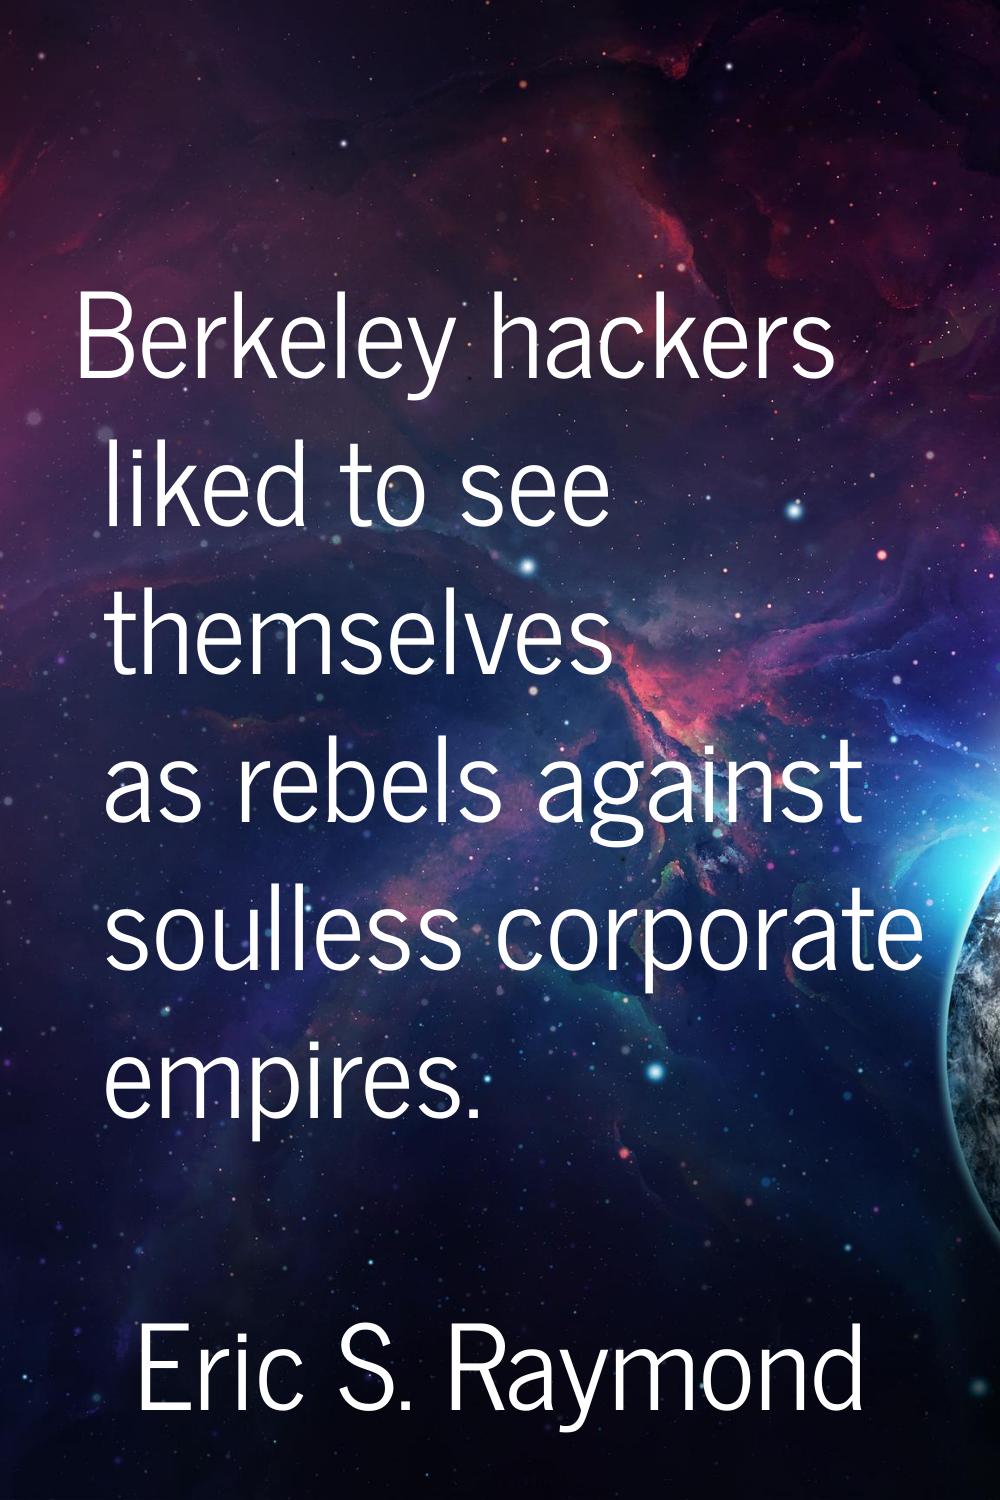 Berkeley hackers liked to see themselves as rebels against soulless corporate empires.